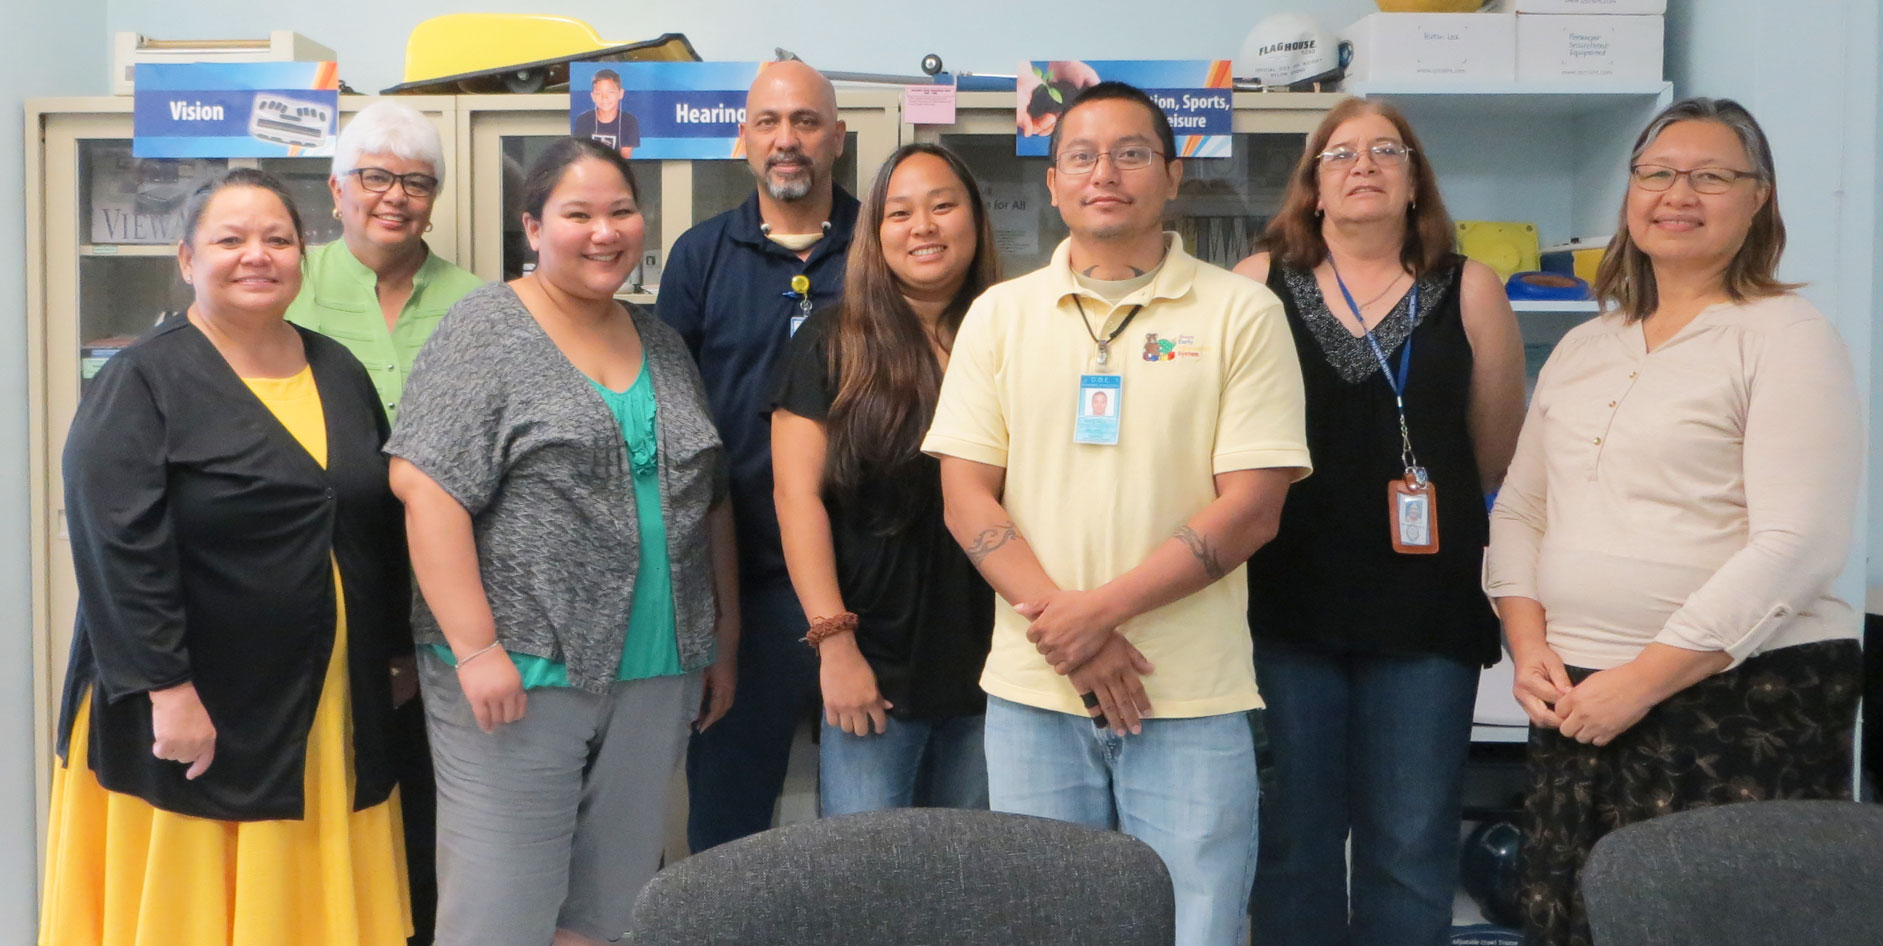 A group of individuals pose for photo at the Guam System for Assistive Technology meeting room.